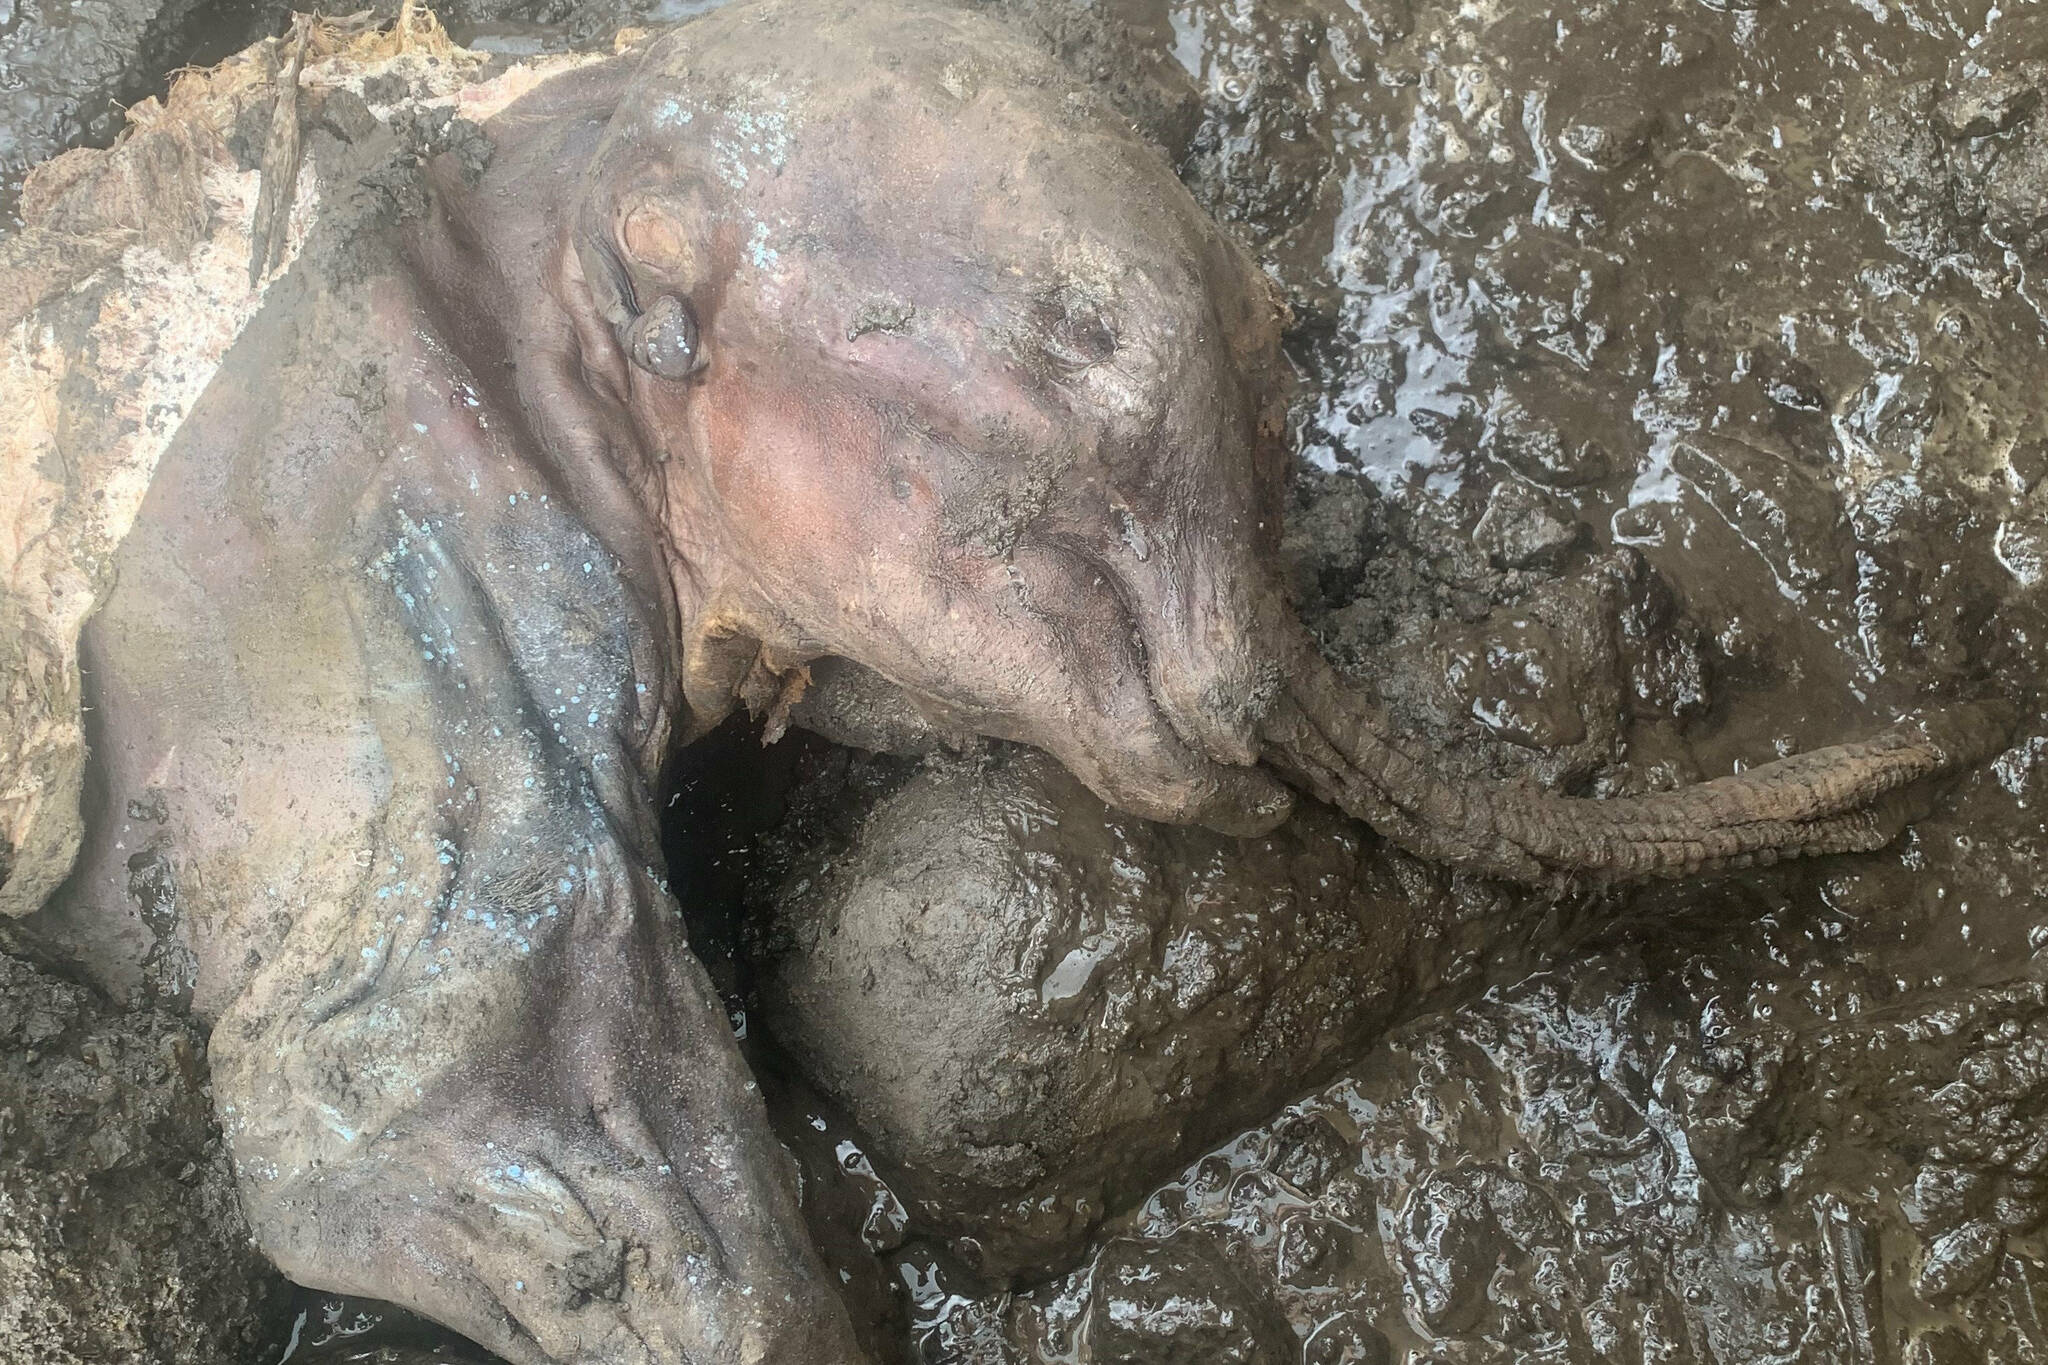 Nun cho ga, the mummified baby woolly mammoth shortly after discovery. (Yukon Government/Submitted)